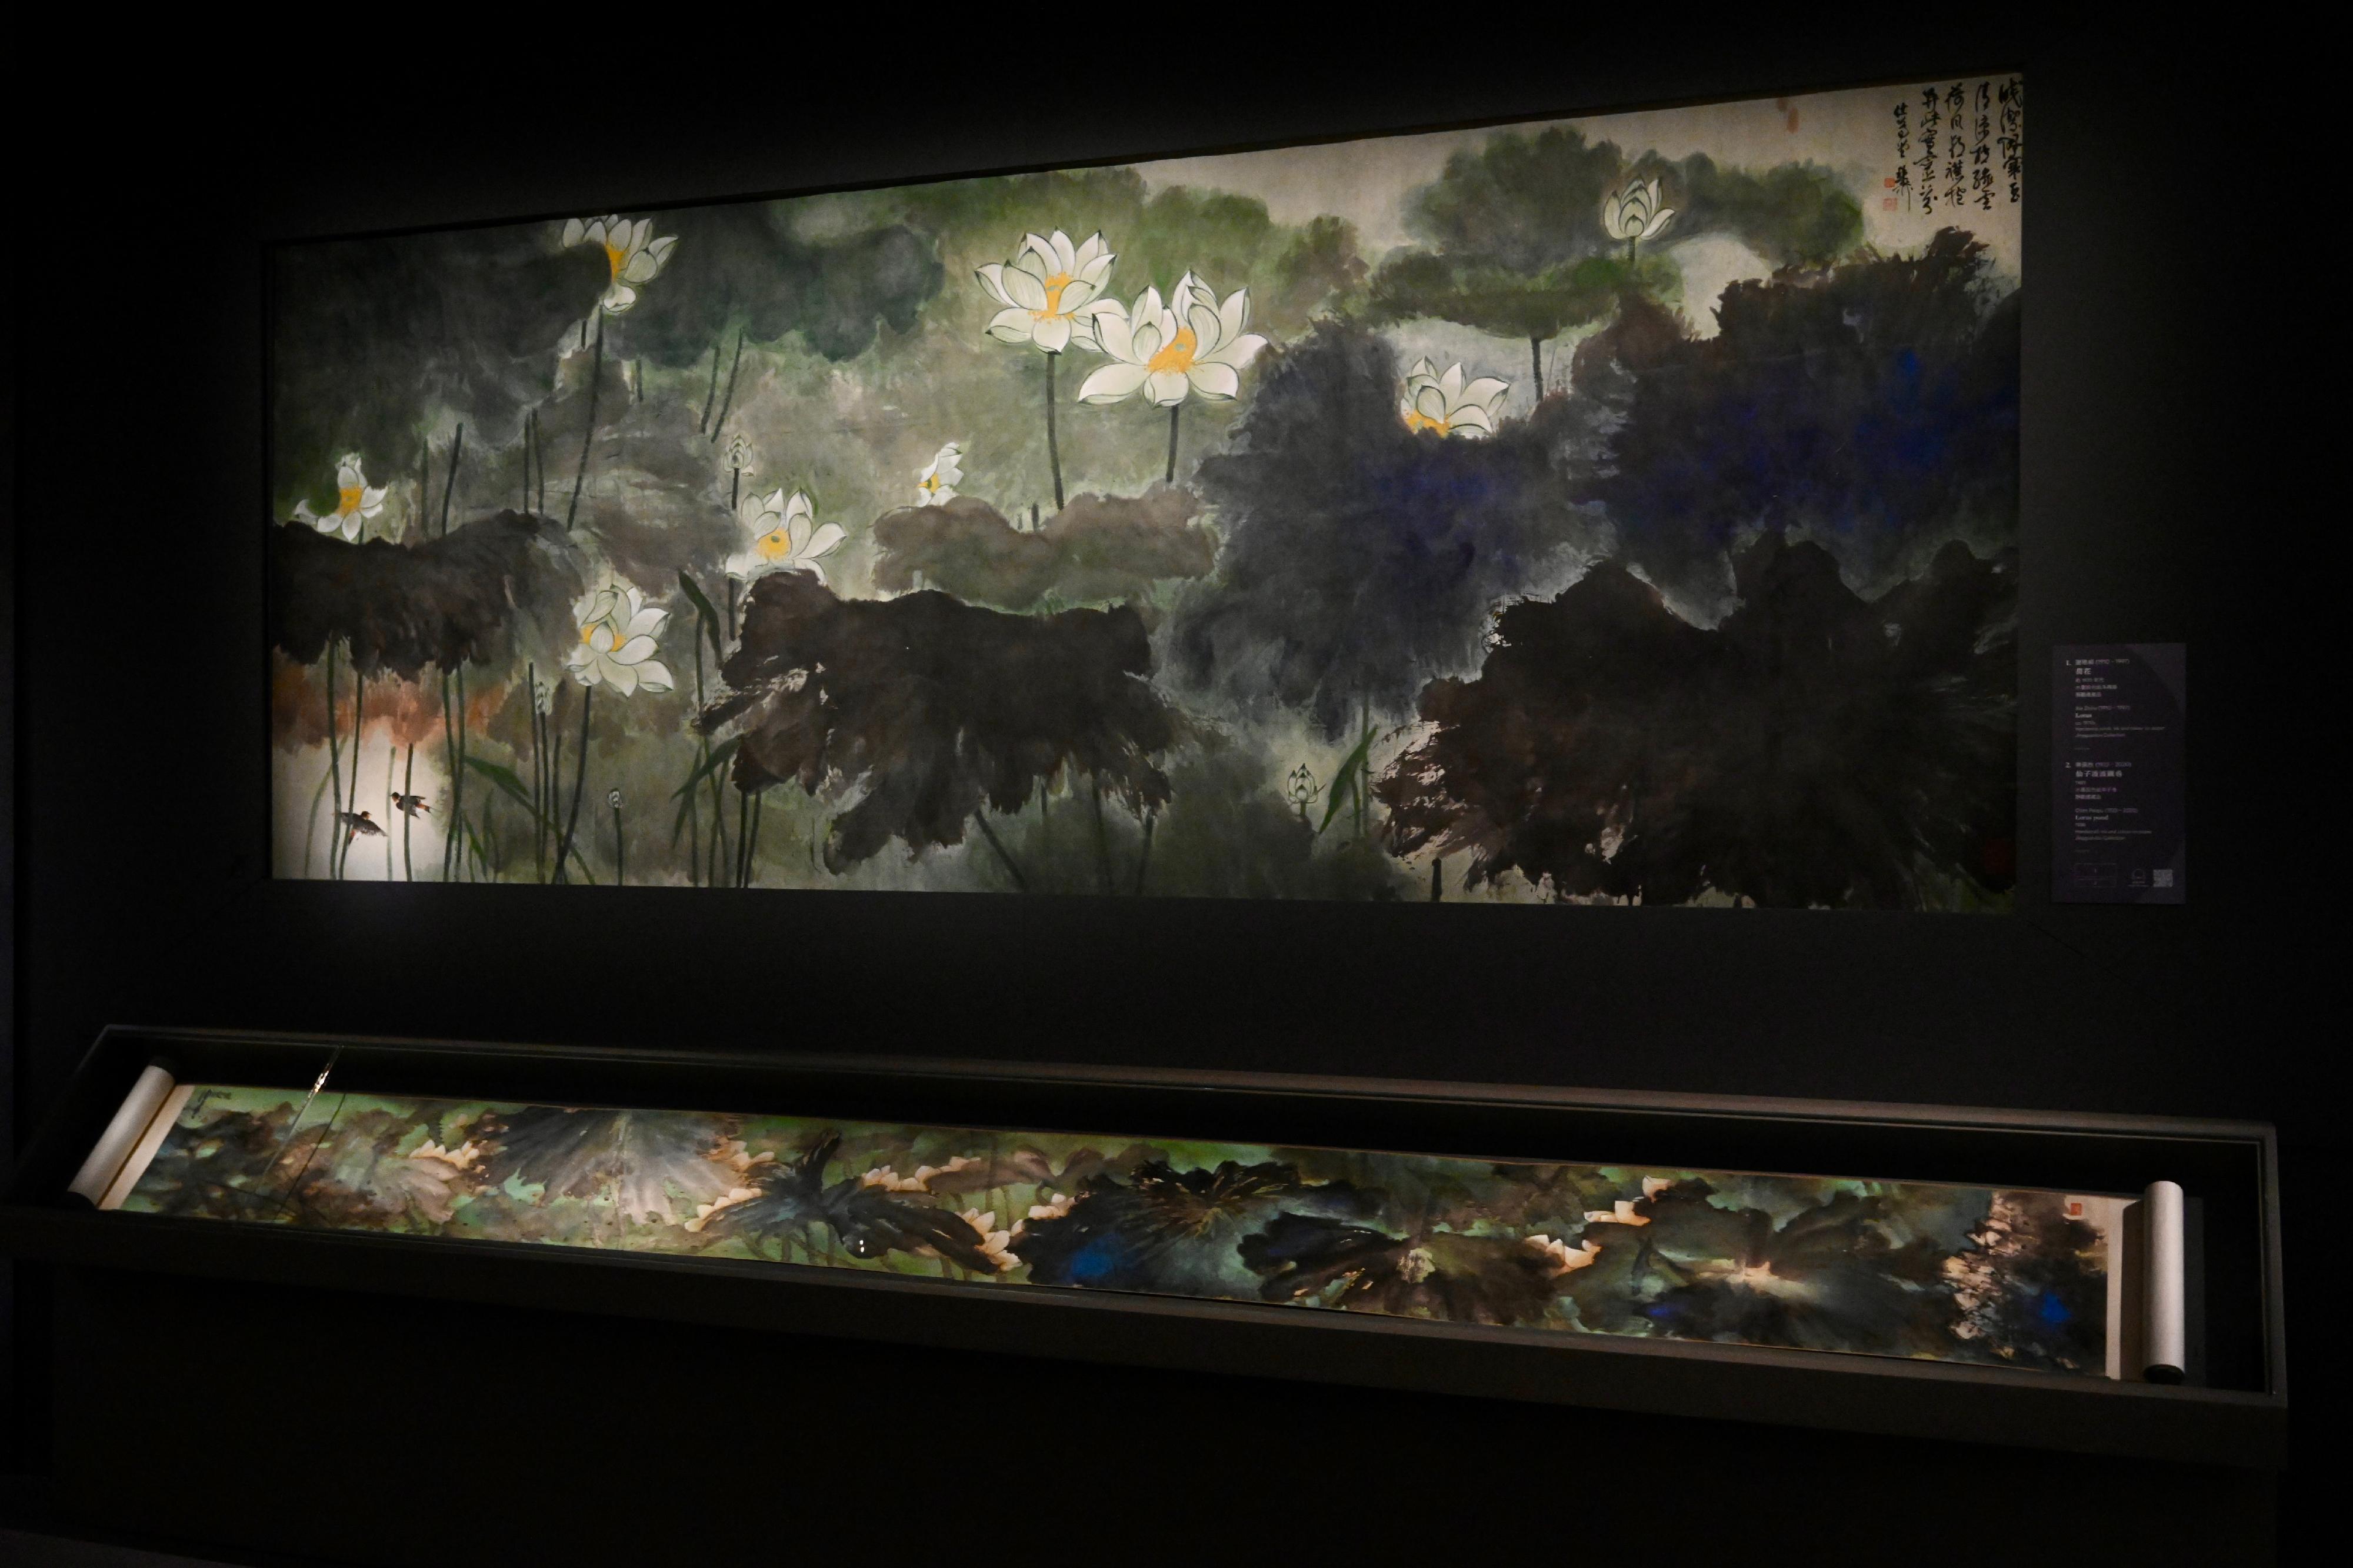 "A Match Made in Painting: Selected Works of Xie Zhiliu and Chen Peiqiu from the Jingguanlou Collection" exhibition will be held at the Hong Kong Museum of Art from tomorrow (July 14). Picture shows Xie Zhliu's painting "Lotus" (back) and Chen Peiqiu's work "Lotus pond" (front).